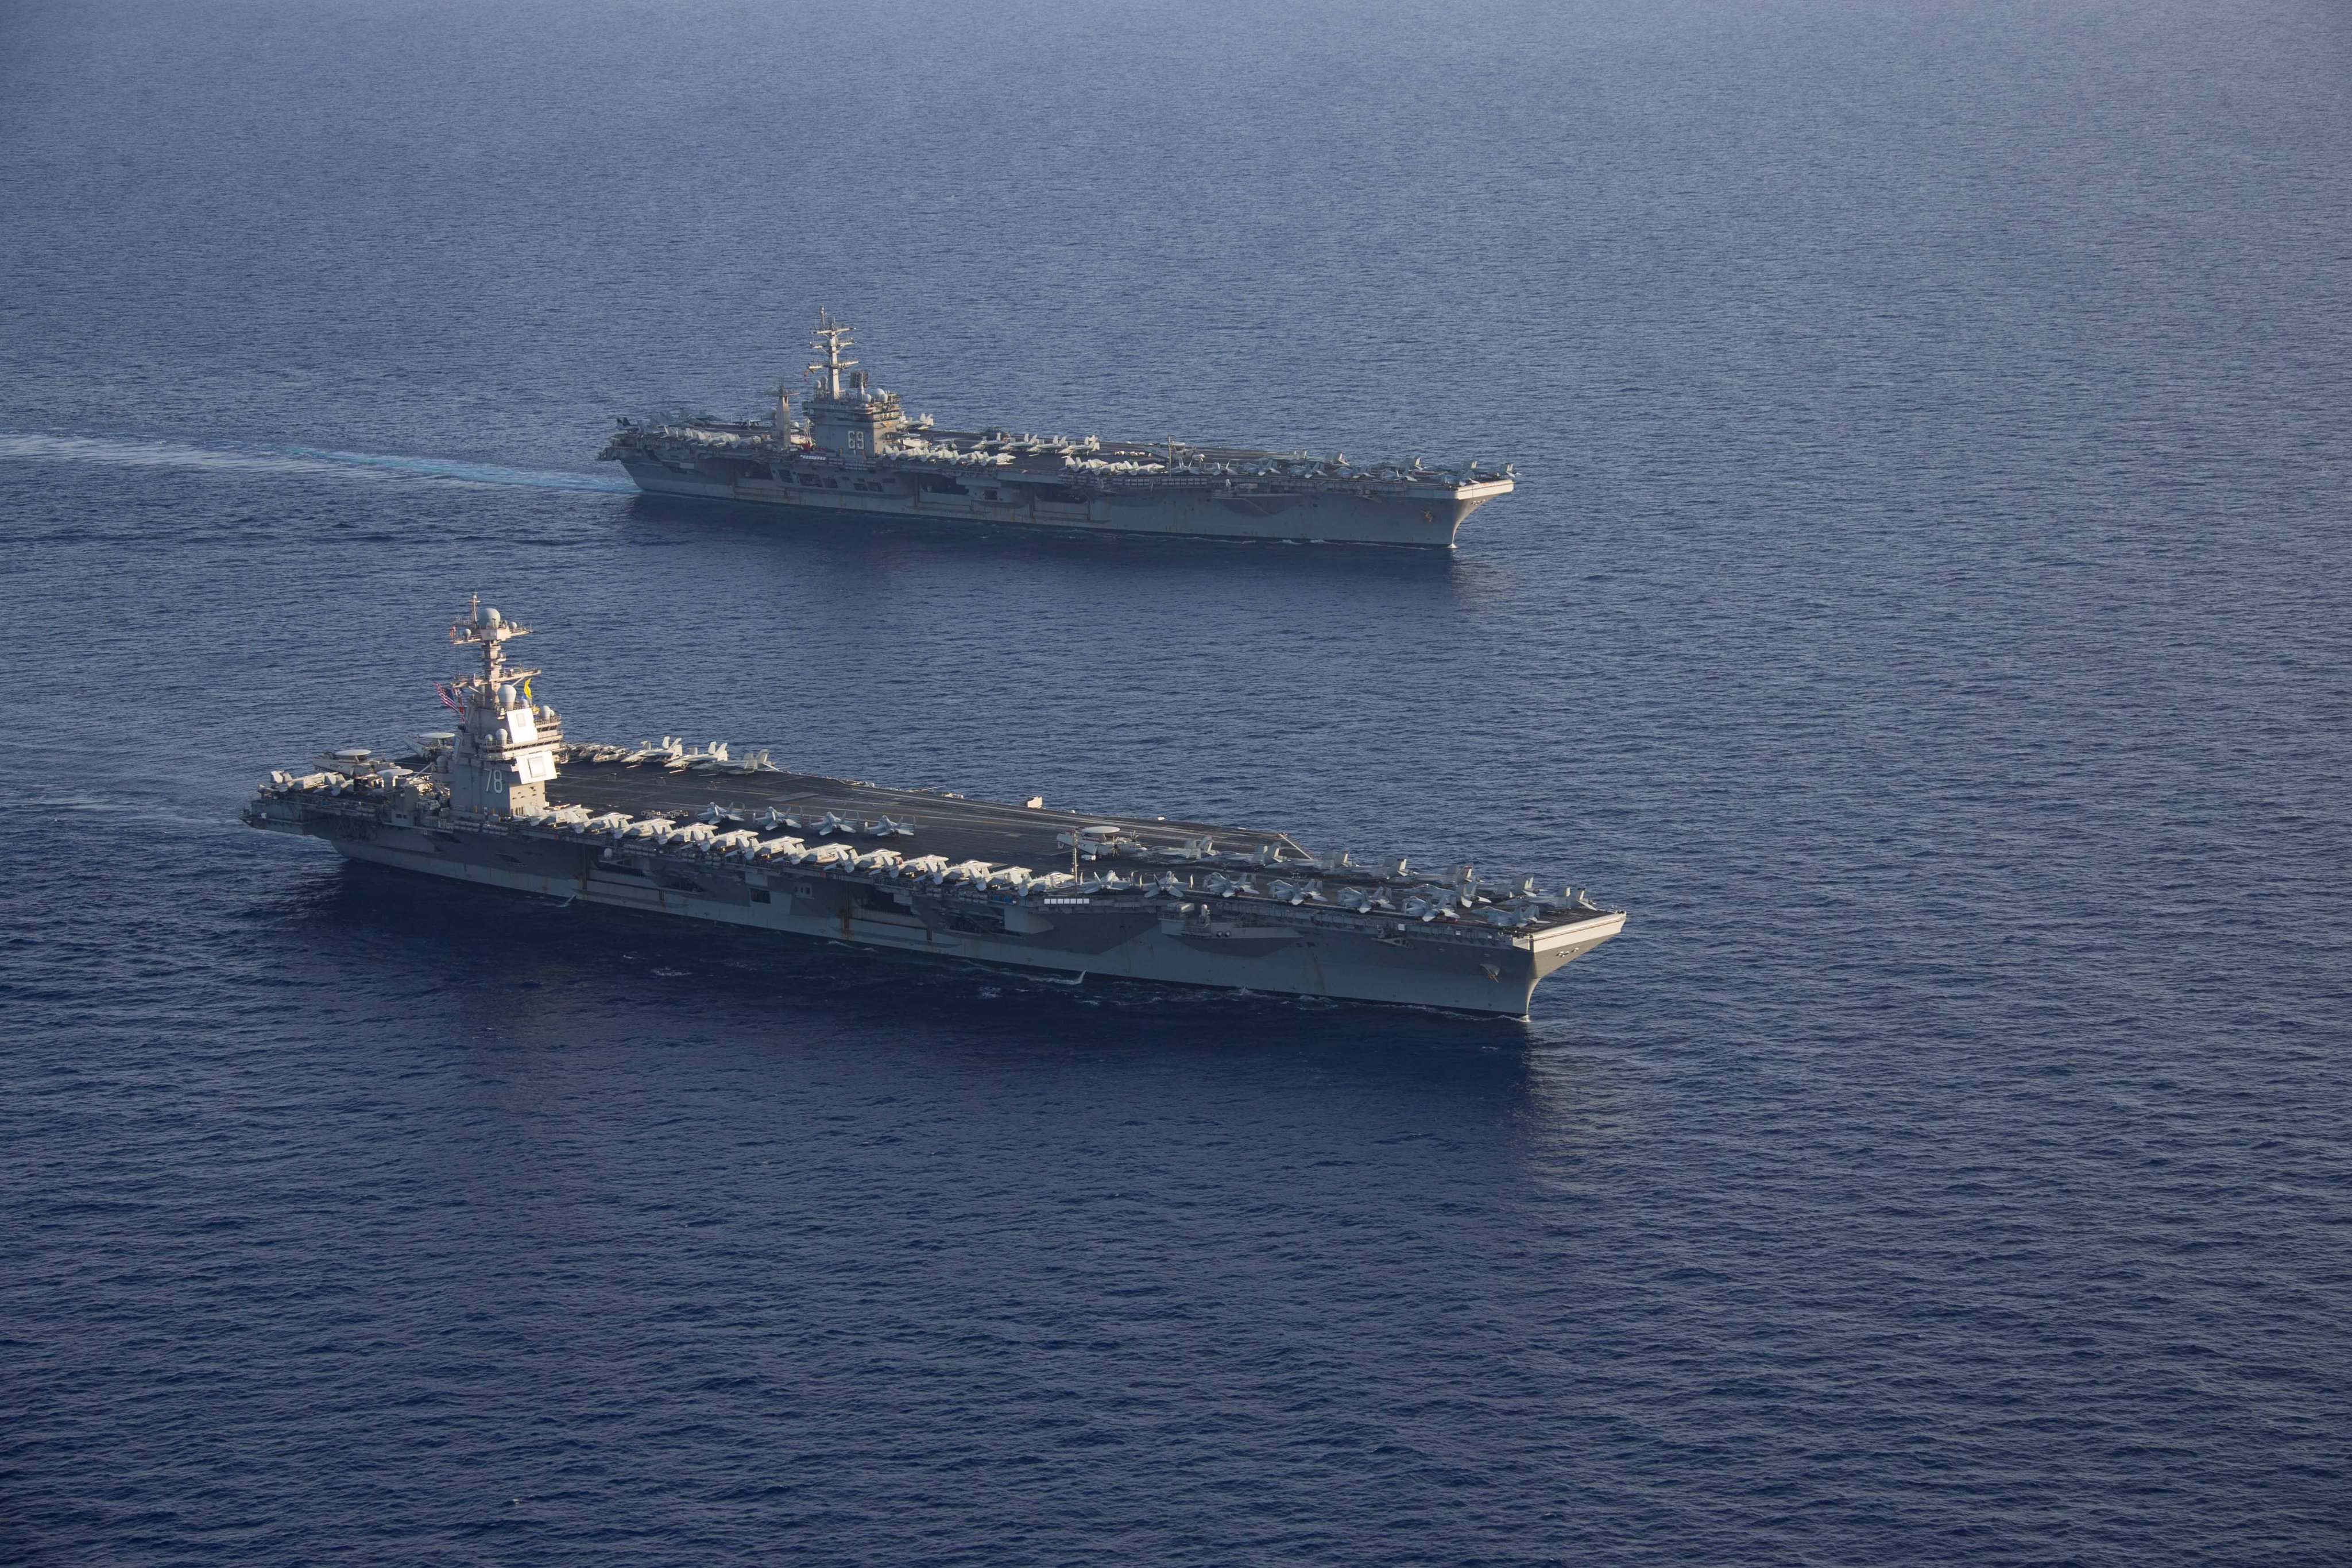 Ships from the Gerald R. Ford and Dwight D. Eisenhower Carrier Strike Groups (CSG), U.S. Sixth Fleet command ship USS Mount Whitney (LCC 20), and Italian Navy frigates Carlo Margottini (F 592) and Virginio Fasan (F 591) sail in formation in the Mediterranean Sea, Nov. 3, 2023. The two carrier strike groups are operating in the area at the direction of the Secretary of Defense to bolster deterrence in the region. (U.S. Navy photo by Mass Communication Specialist 2nd Class Jacob Mattingly)